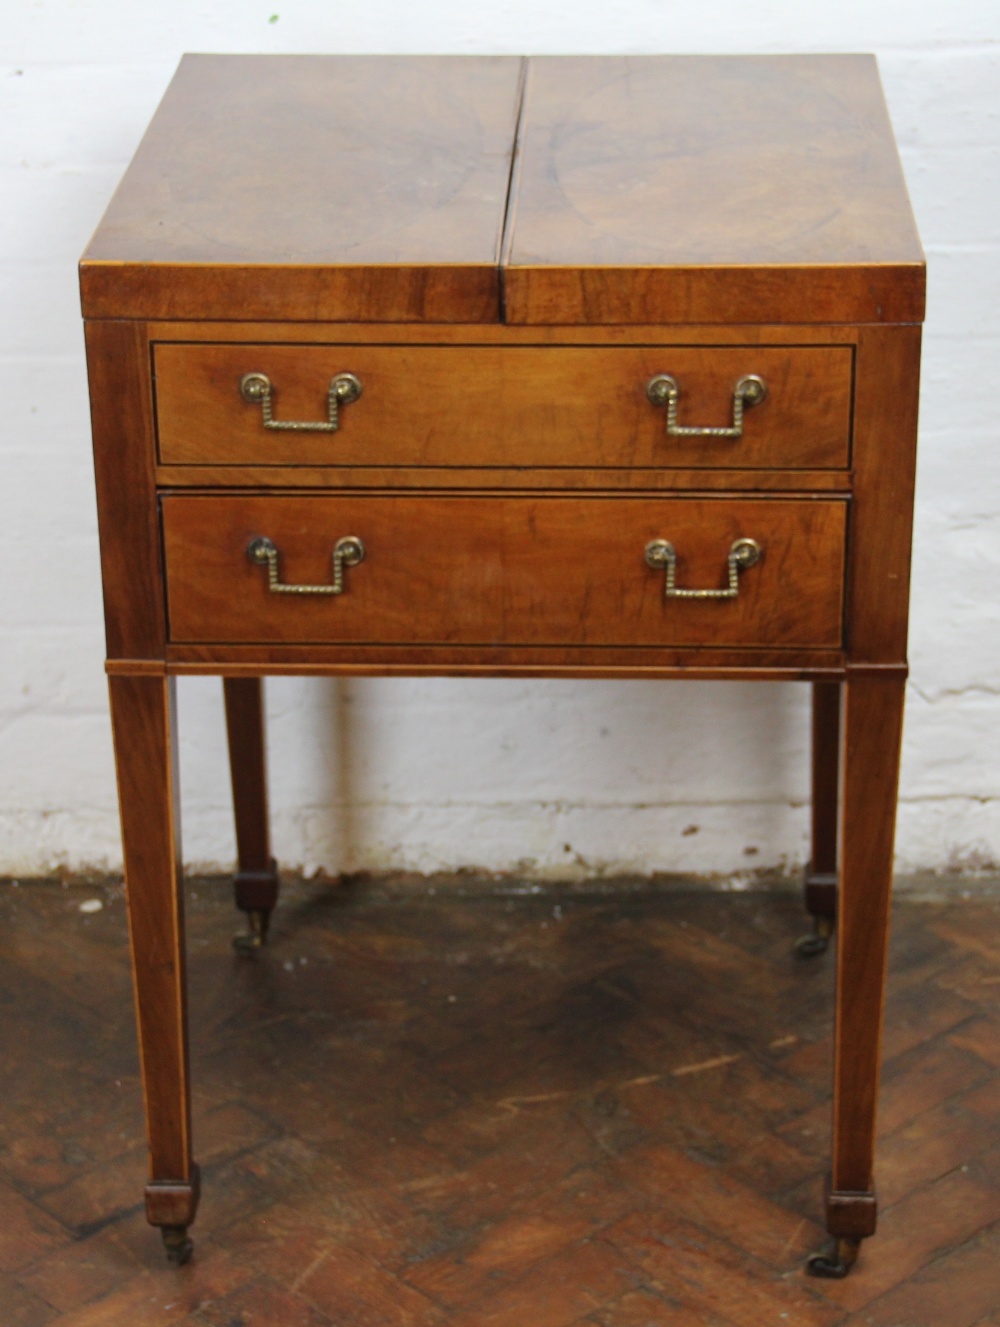 A Regency inlaid mahogany Gentleman's writing desk or poudreuse,